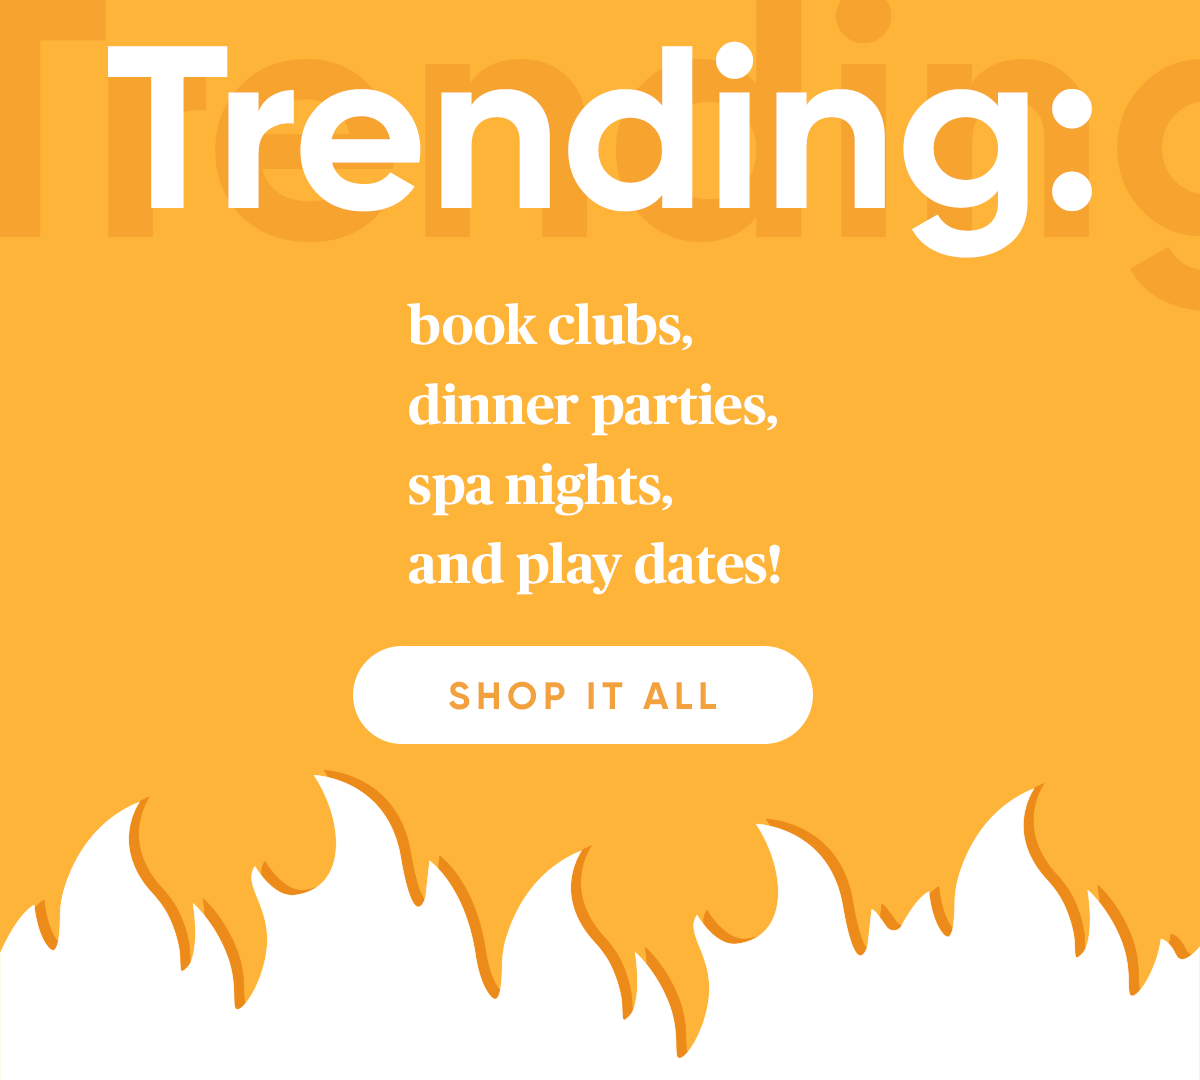 Trending: book clubs, dinner parties, spa nights, and play dates! 